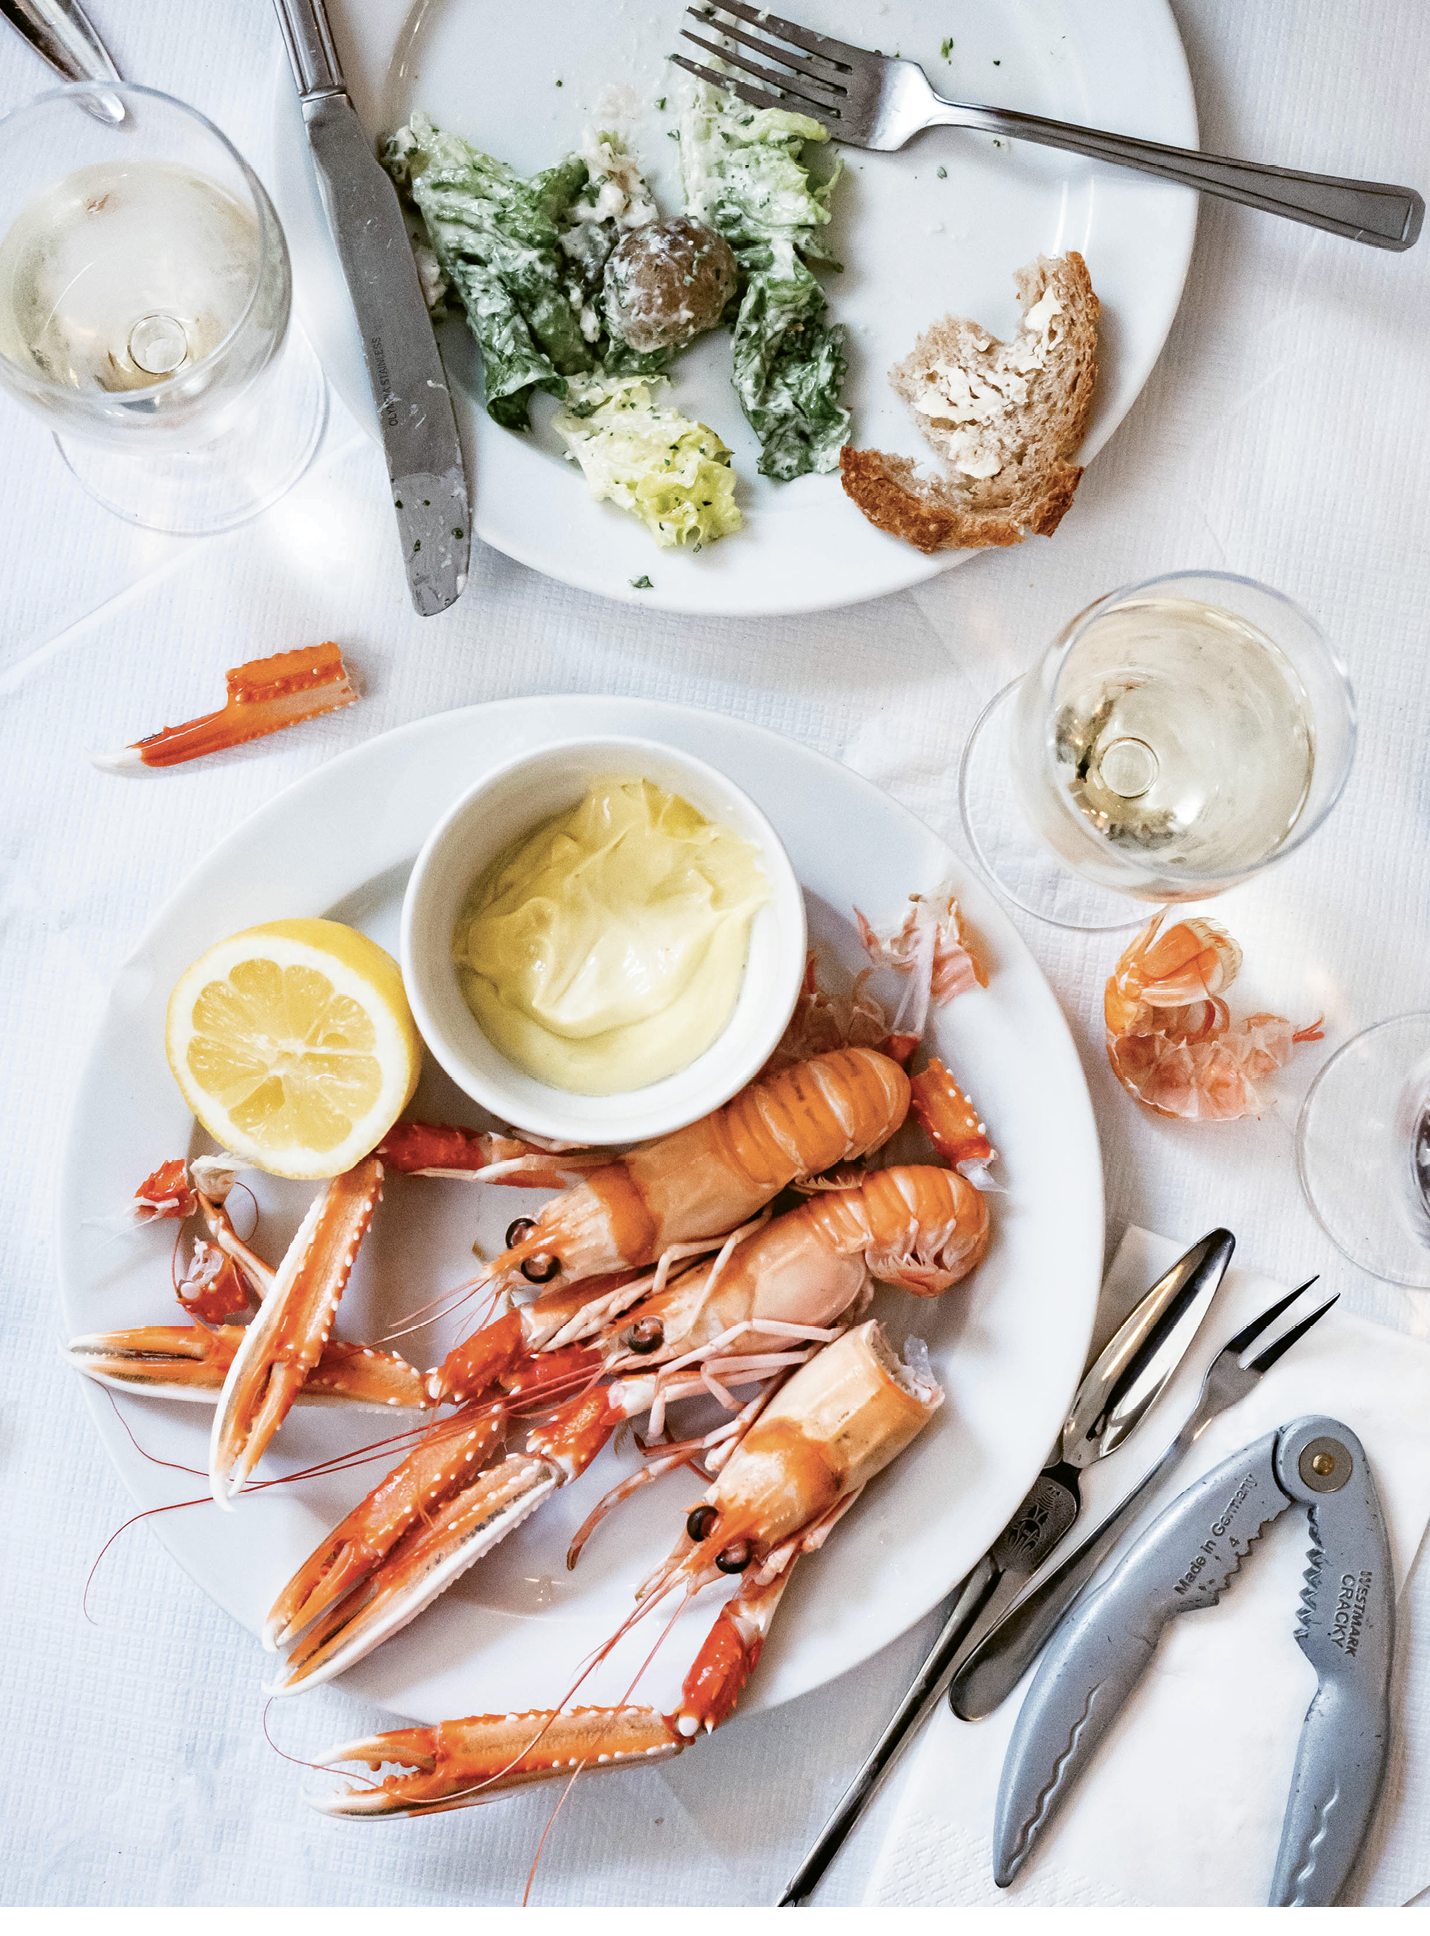 The day’s menu included chilled langoustines with lemon and aioli, lobster-like and salty-bright, with glasses of Petit Salé de Villeneuve, 2017.